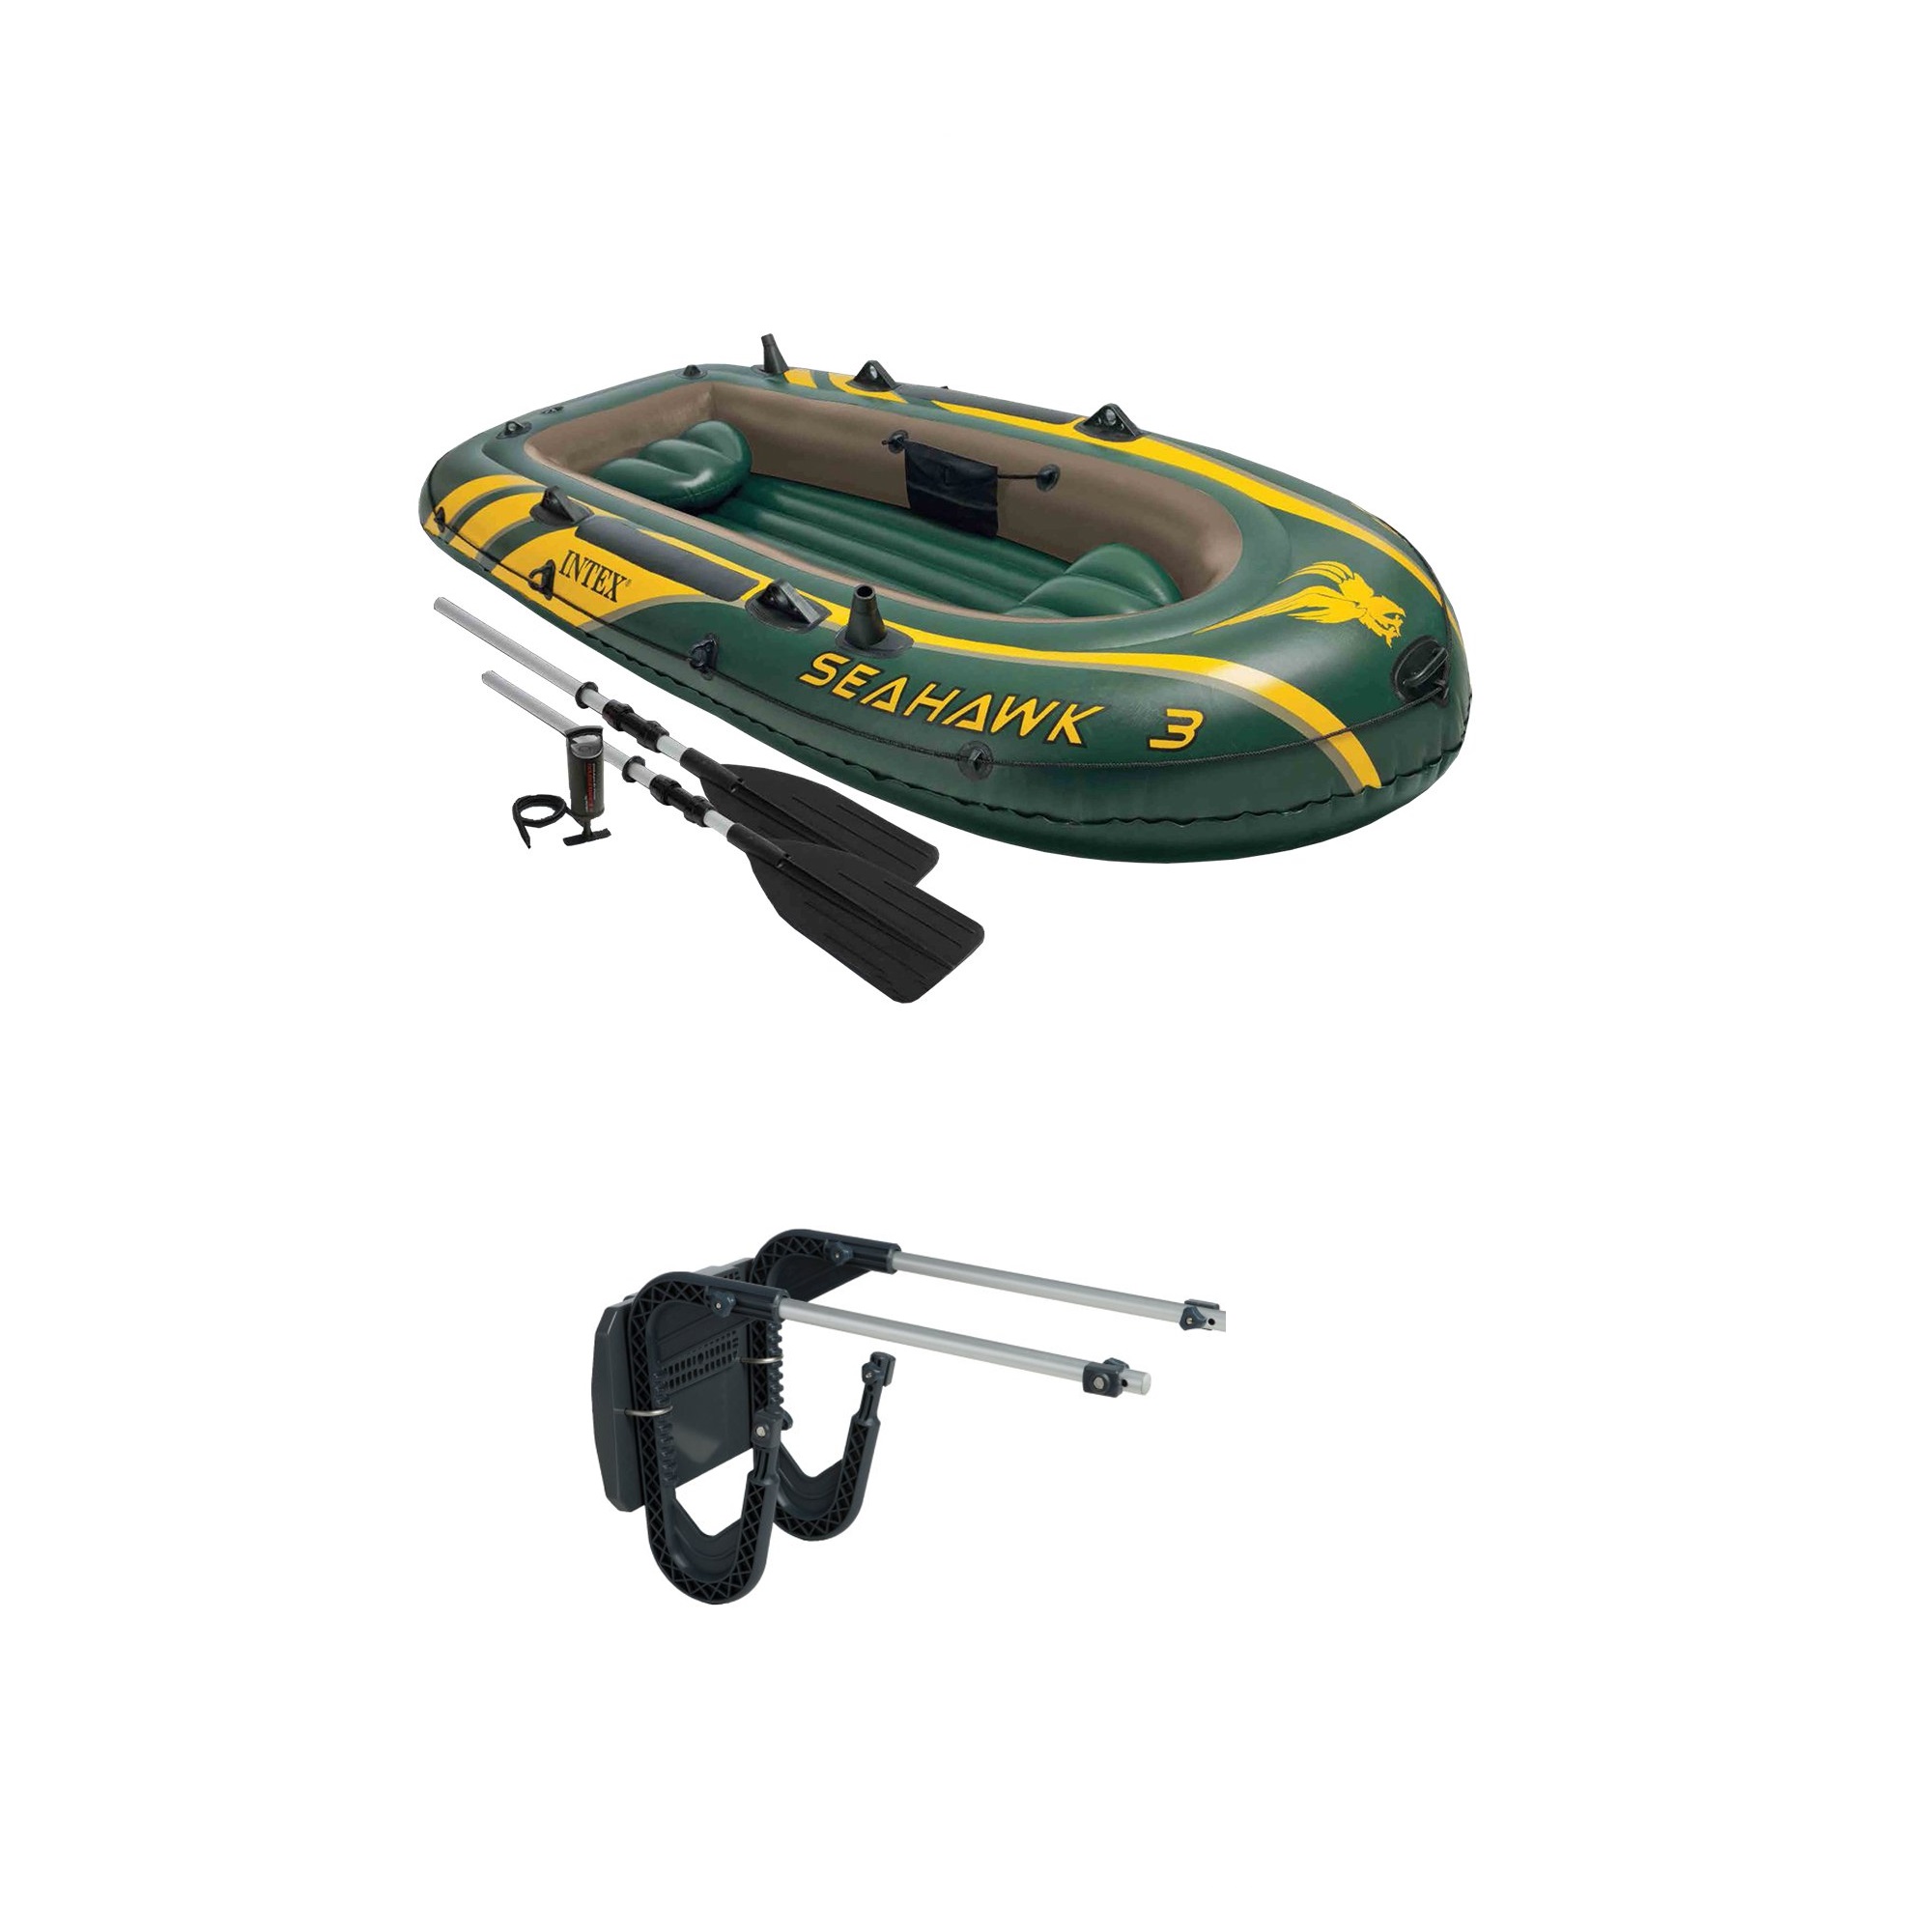 Intex 3 Person Boat Set w/ Aluminum Oars & Pump and Composite Boat Motor Mount - Click1Get2 Promotions&sale=mega Discount&secure=symbol&tag=asos&sort_by=lowest Price